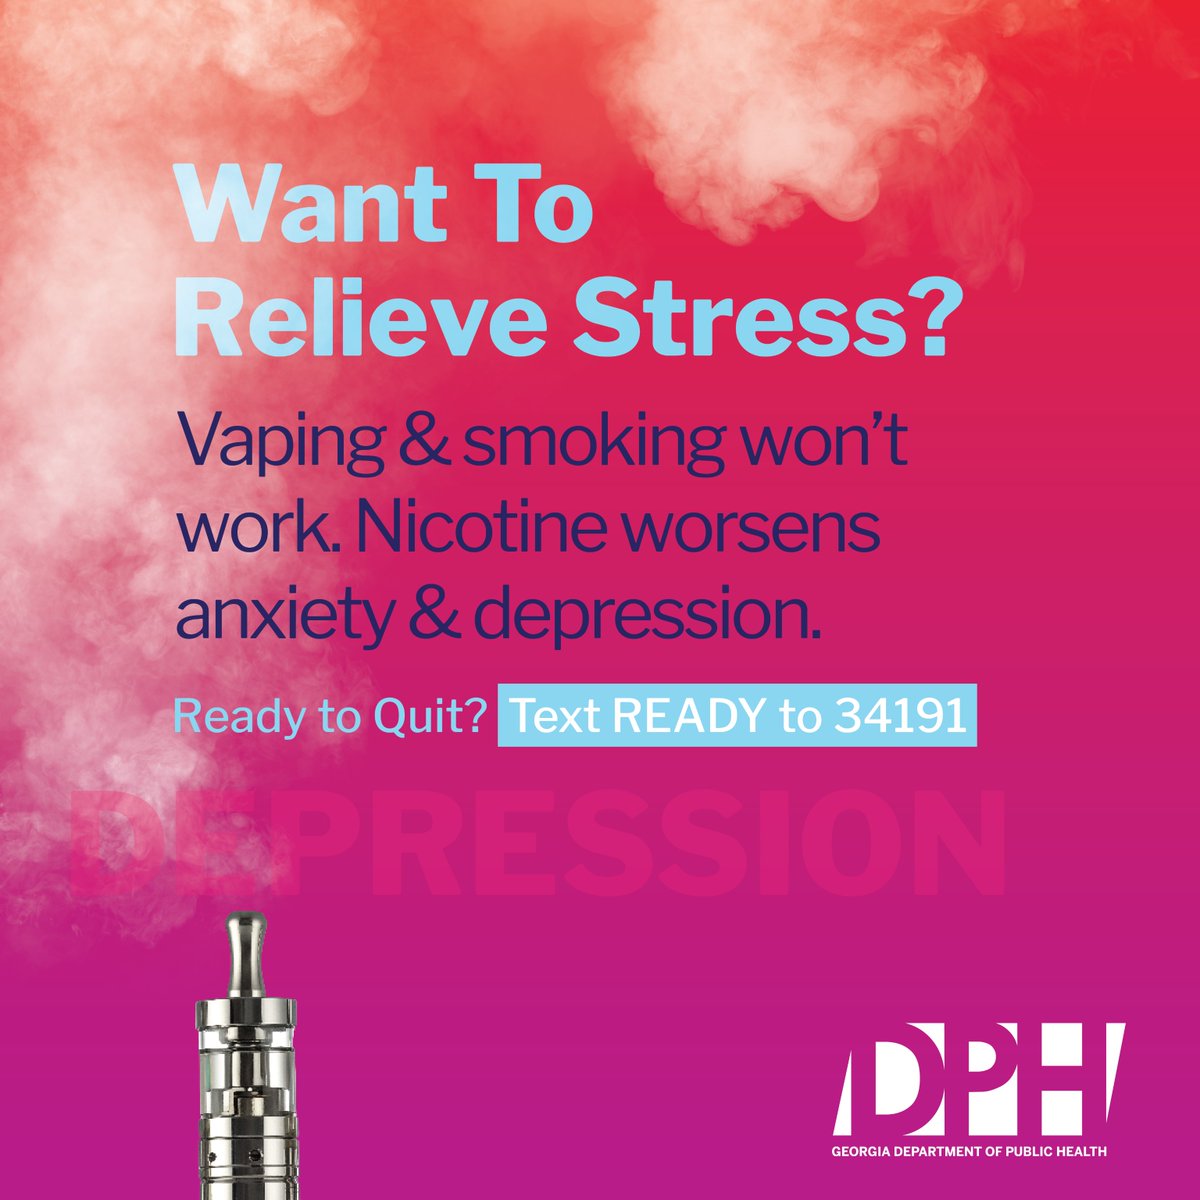 Break free from vaping and smoking! Text READY to 34191 to quit smoking and prioritize your well-being.